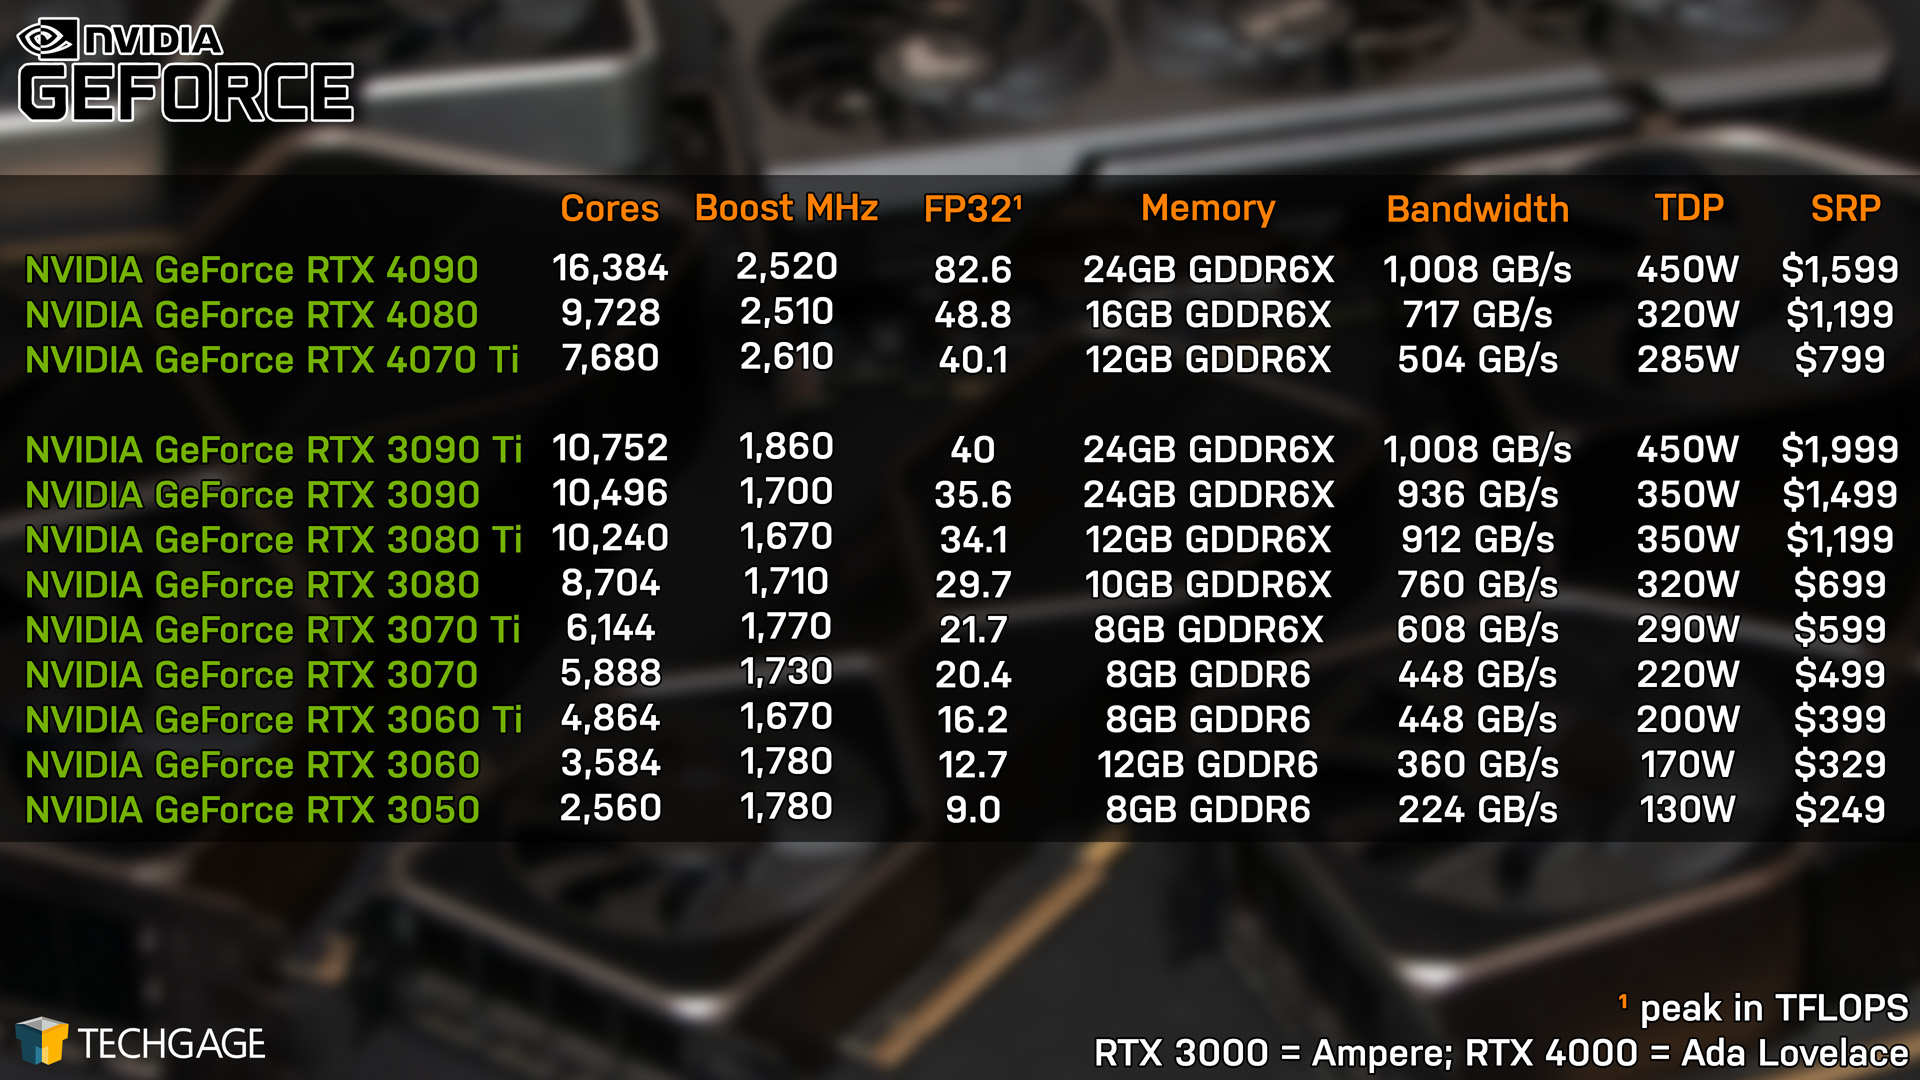 NVIDIA GeForce Lineup (as of RTX 4070 Ti Launch)